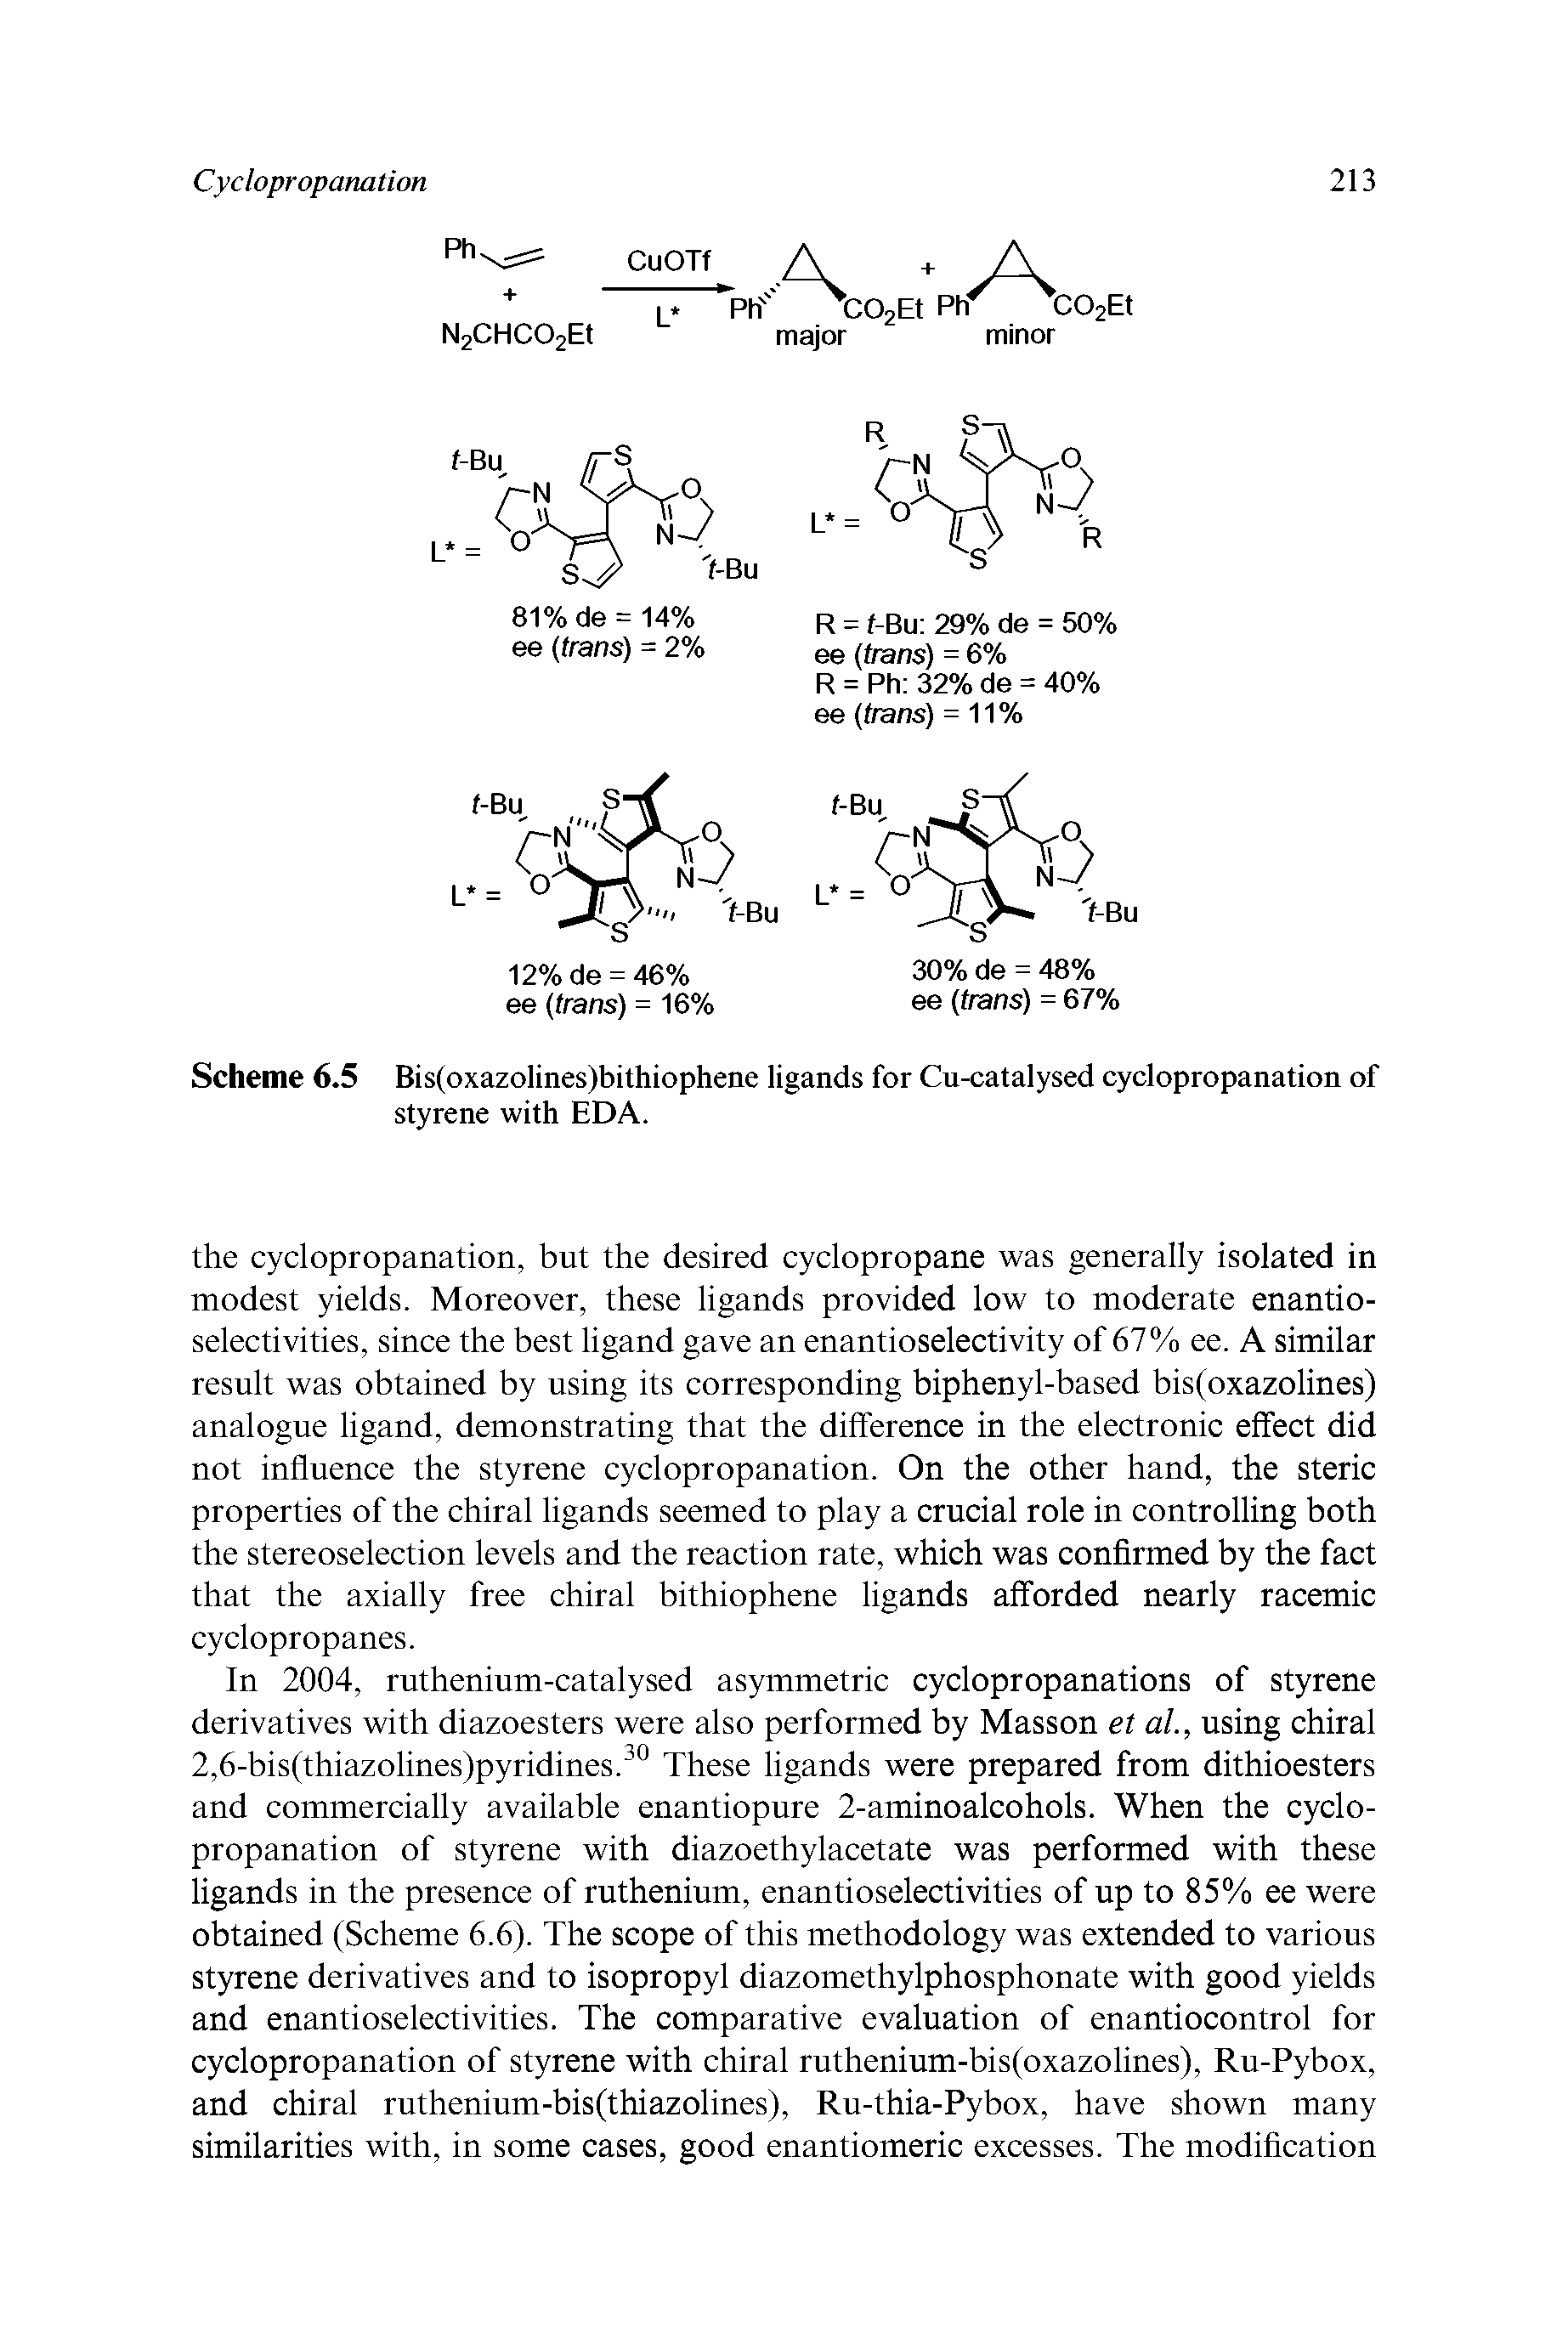 Scheme 6.5 Bis(oxazolines)bithiophene ligands for Cu-catalysed cyclopropanation of styrene with EDA.